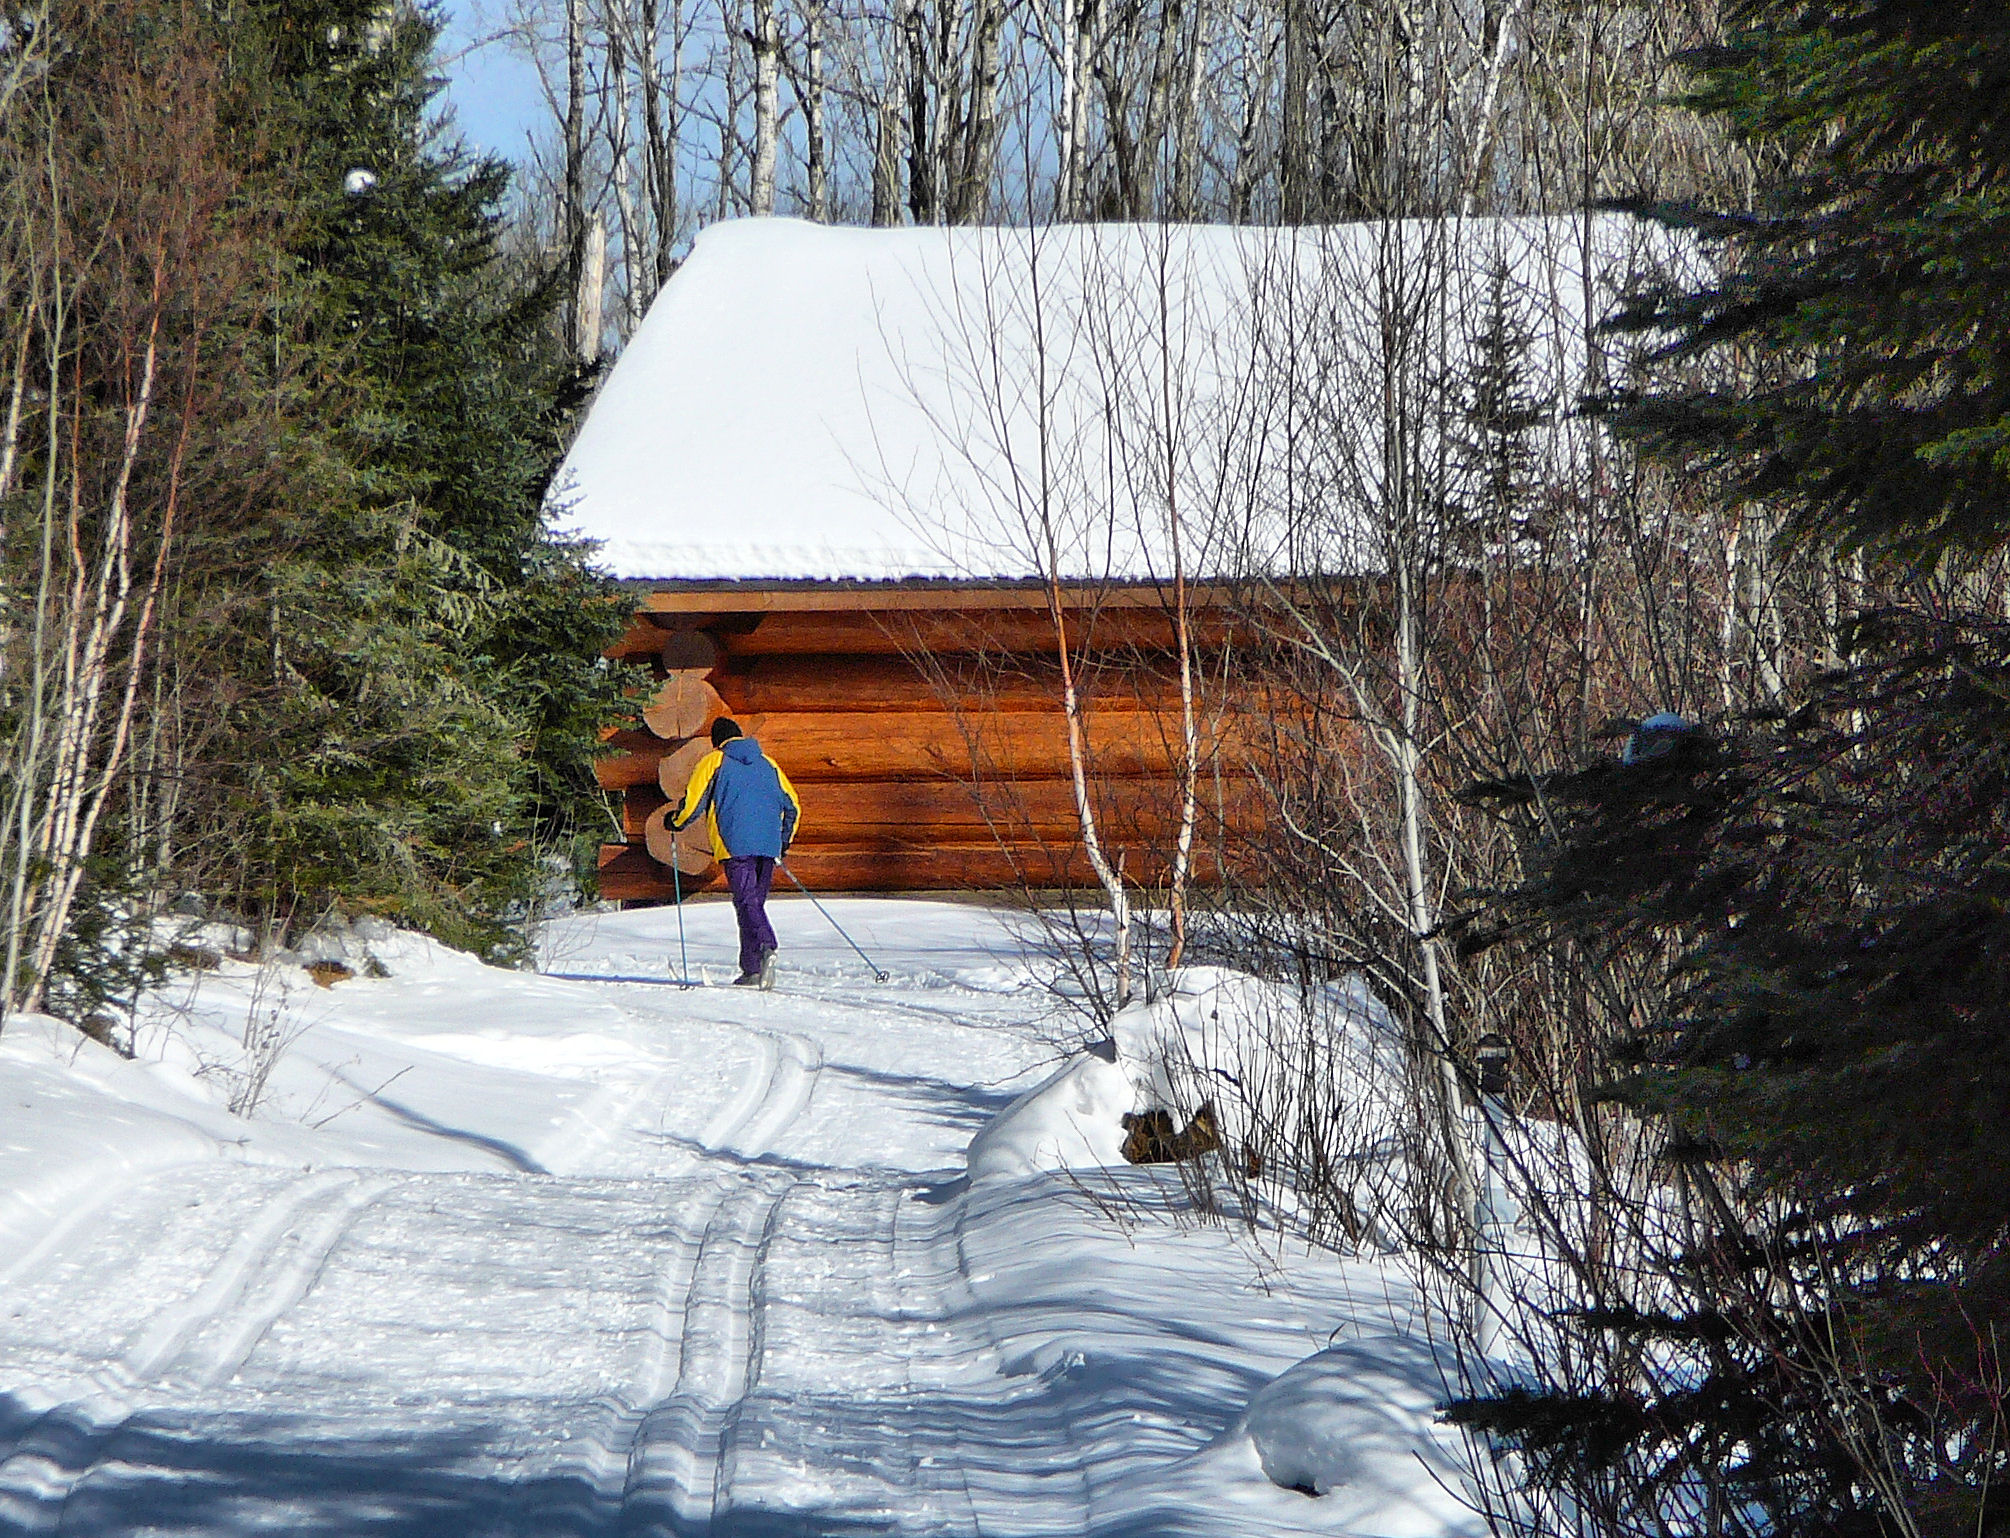 Cross country skier skiing towards log cabin in the winter